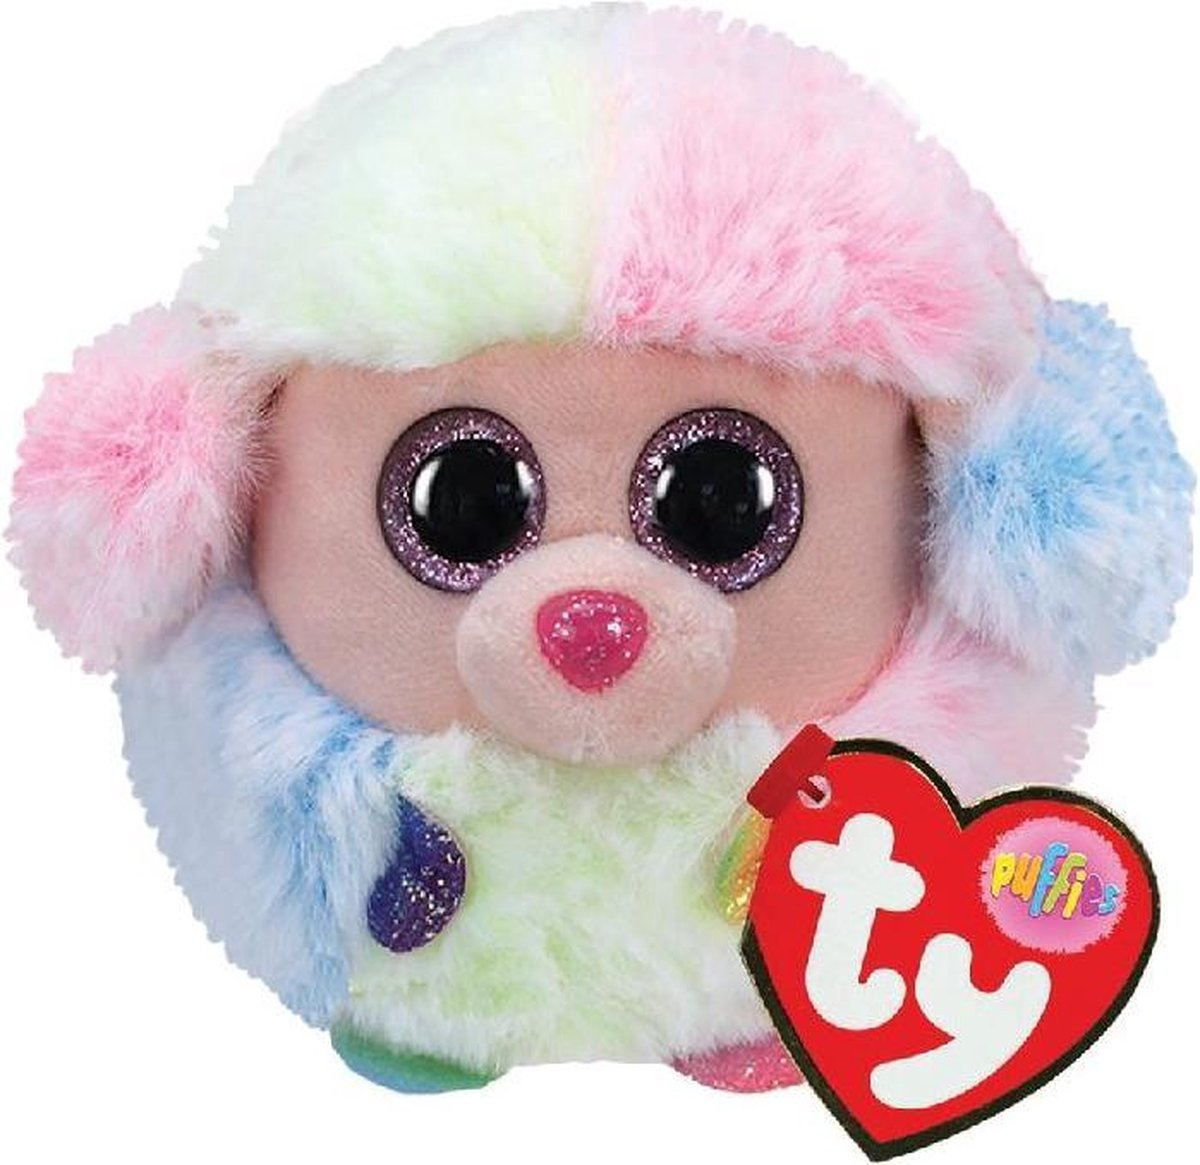 Ty Teeny Puffies Rainbow Poodle 10cm - Ty